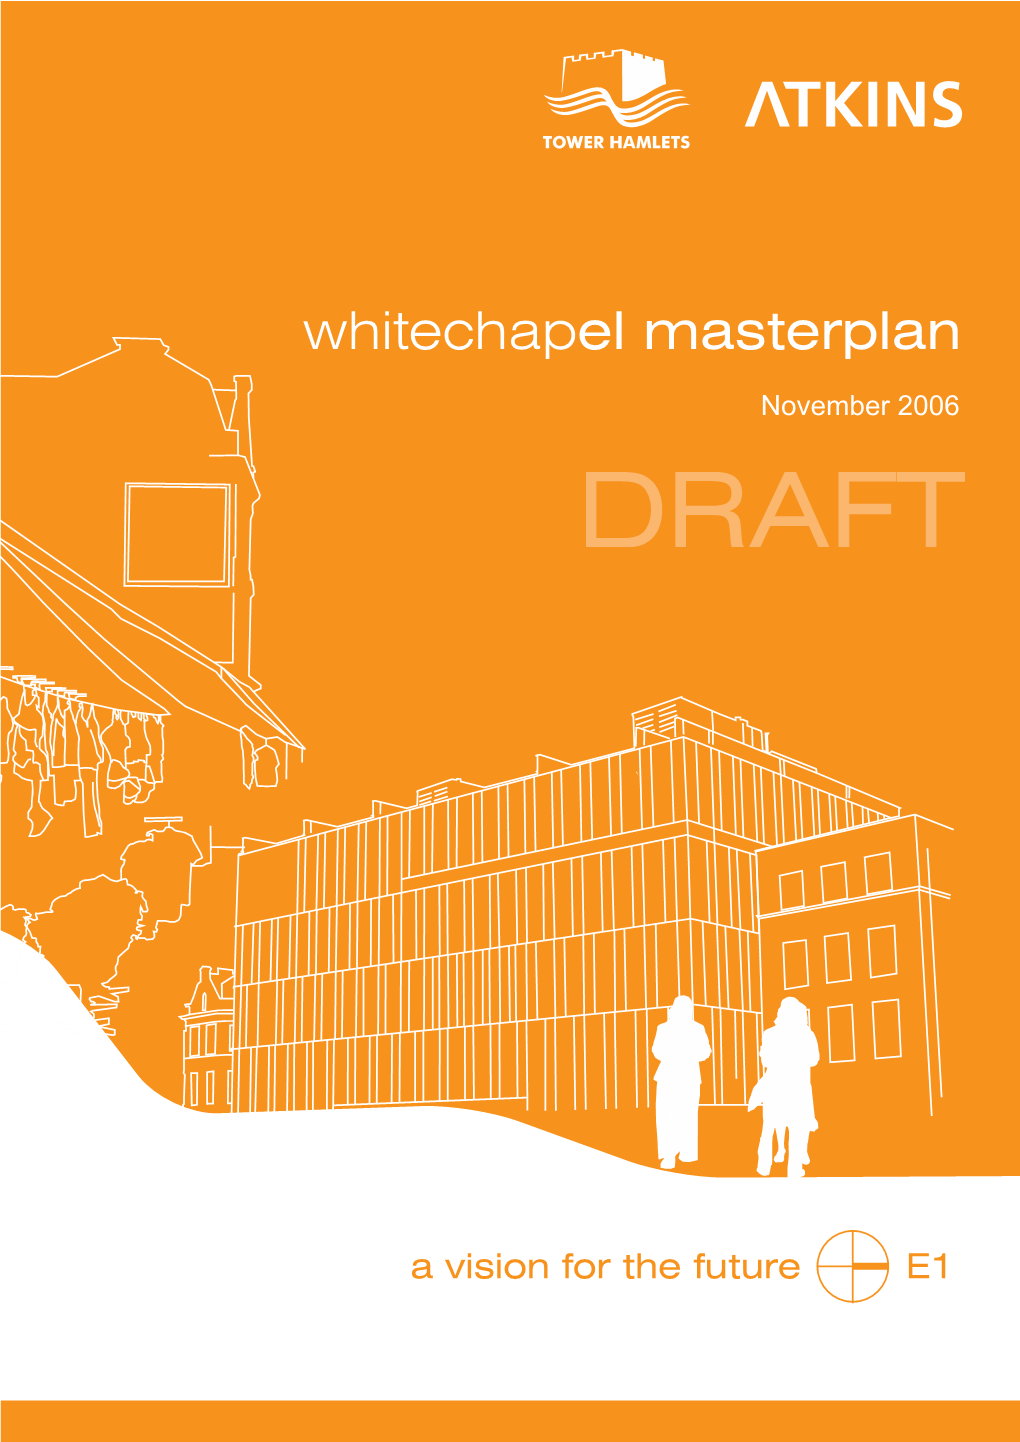 Introduction 1.2 Whitechapel Is Changing 1.3 the Whitechapel Masterplan 1.4 Planning Policy Context 1.5 What the Community Says About Whitechapel